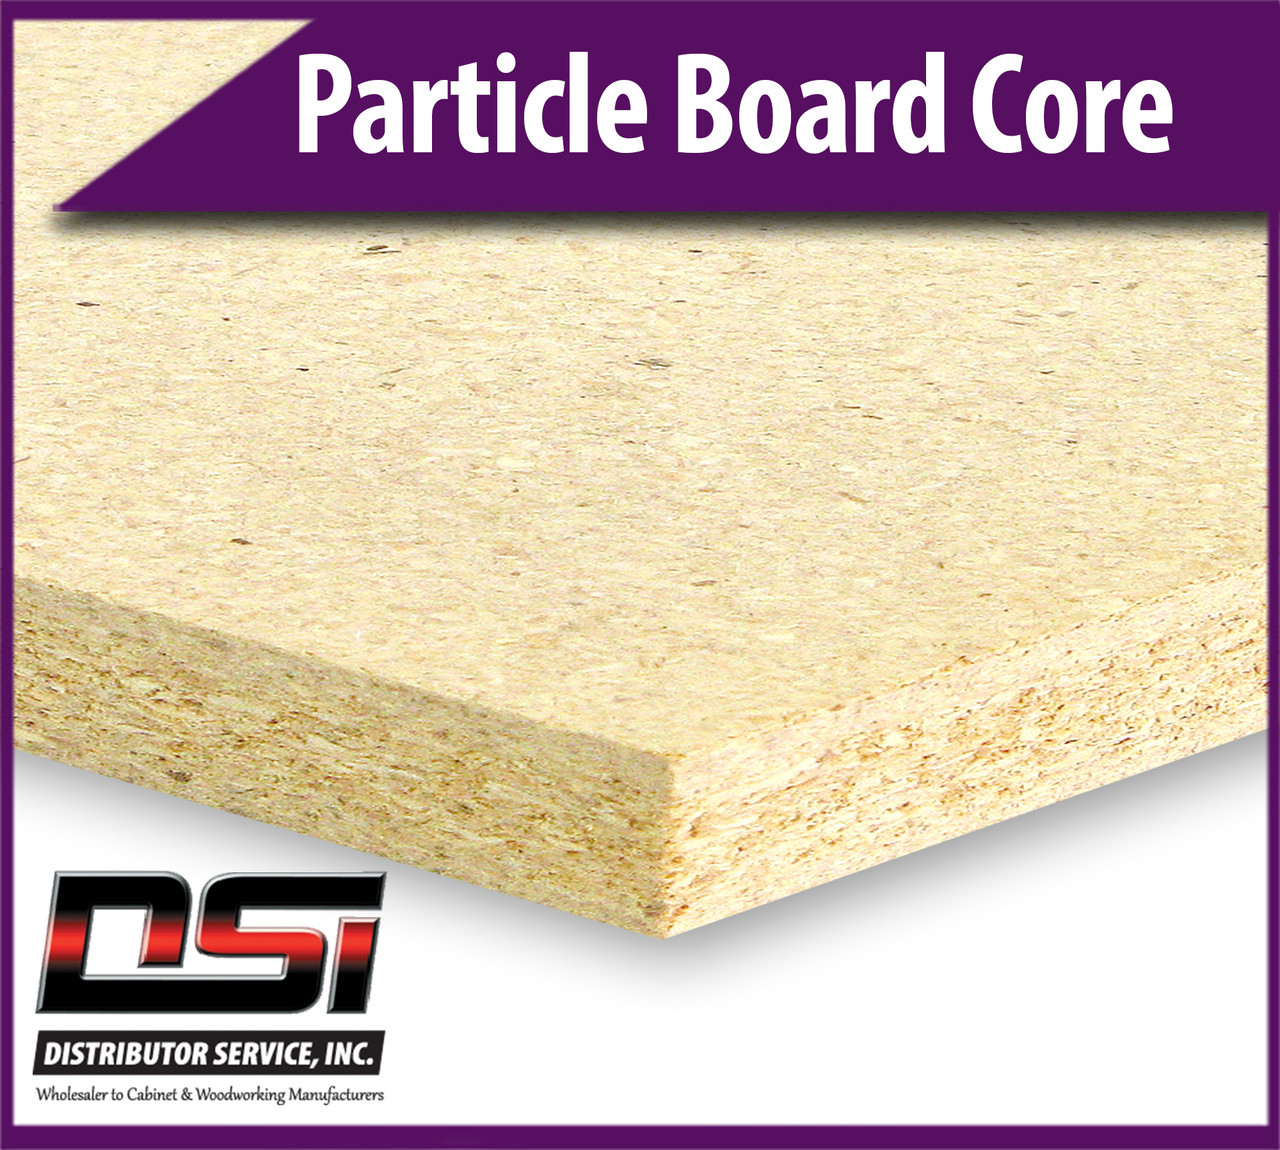 Particle Board Core 3/4" x 30" x 121" Industrial Particleboard Panels